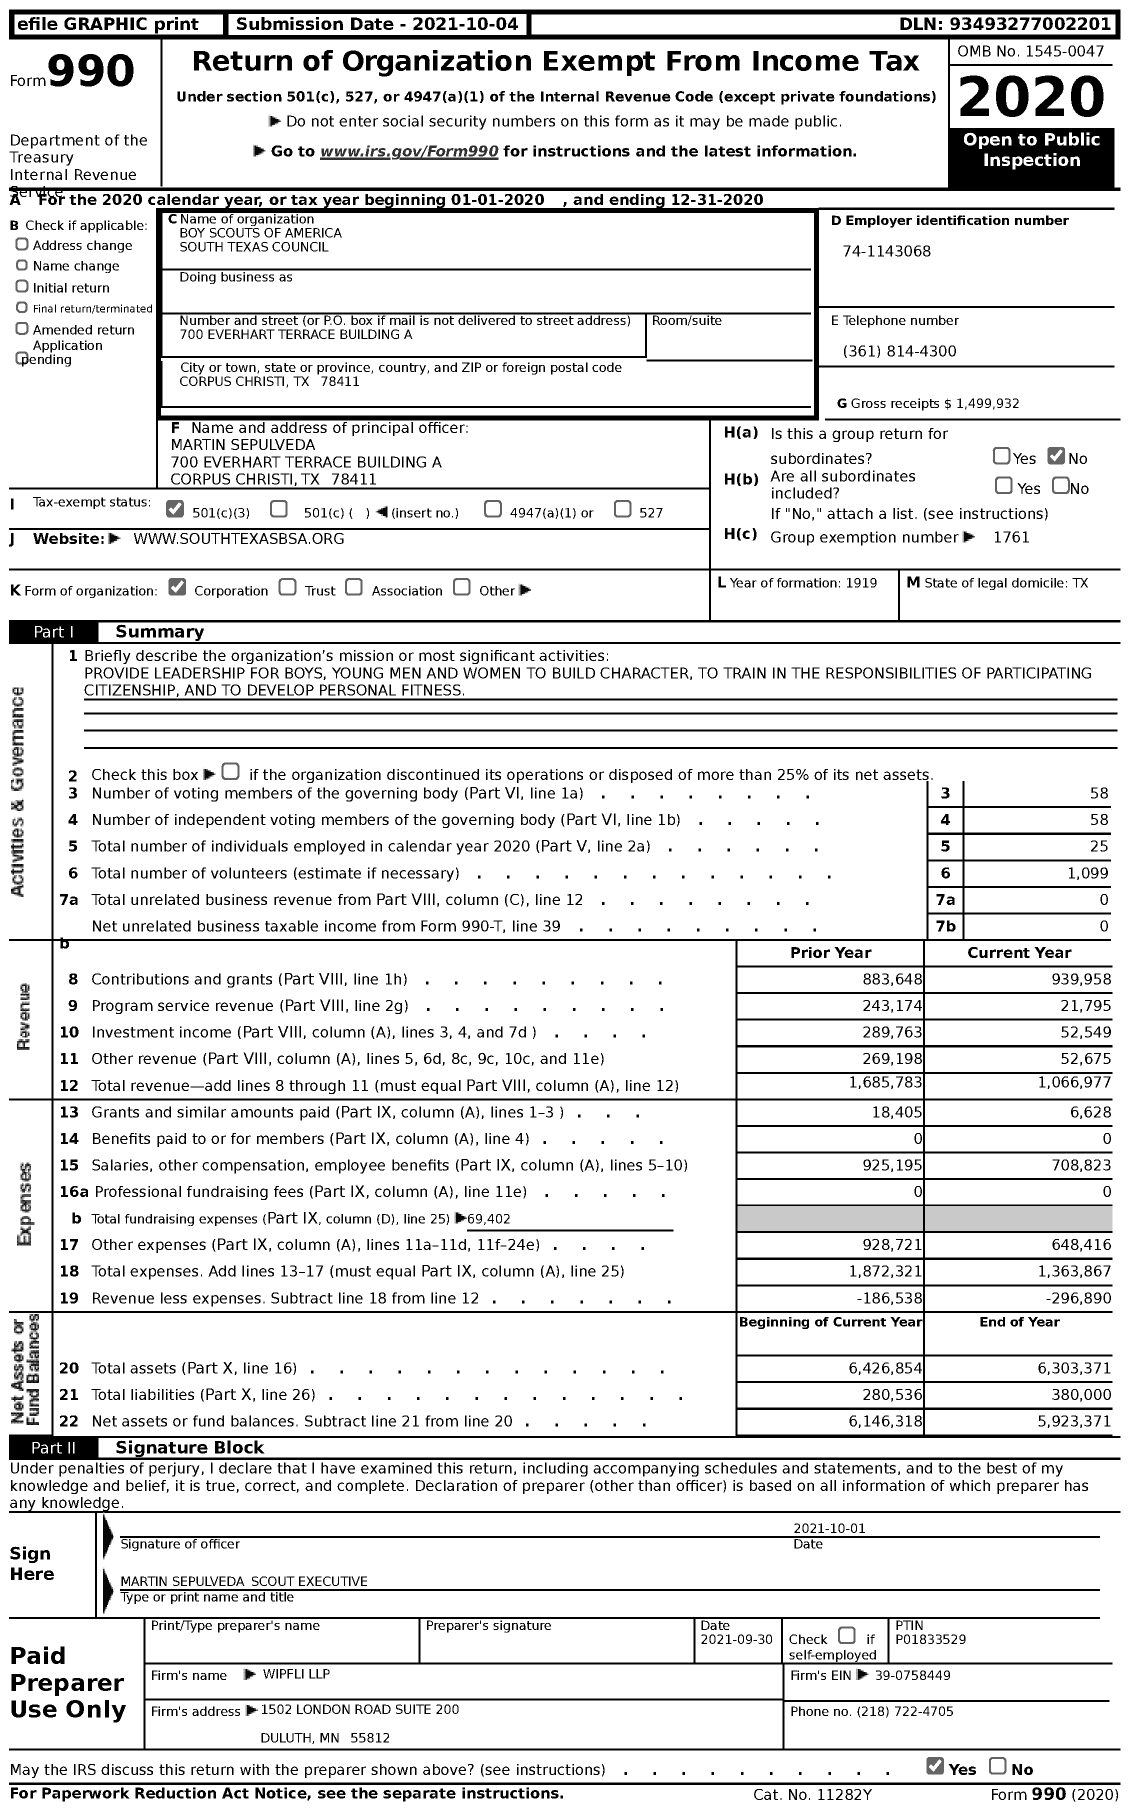 Image of first page of 2020 Form 990 for Boy Scouts of America - 577 South Texas Council